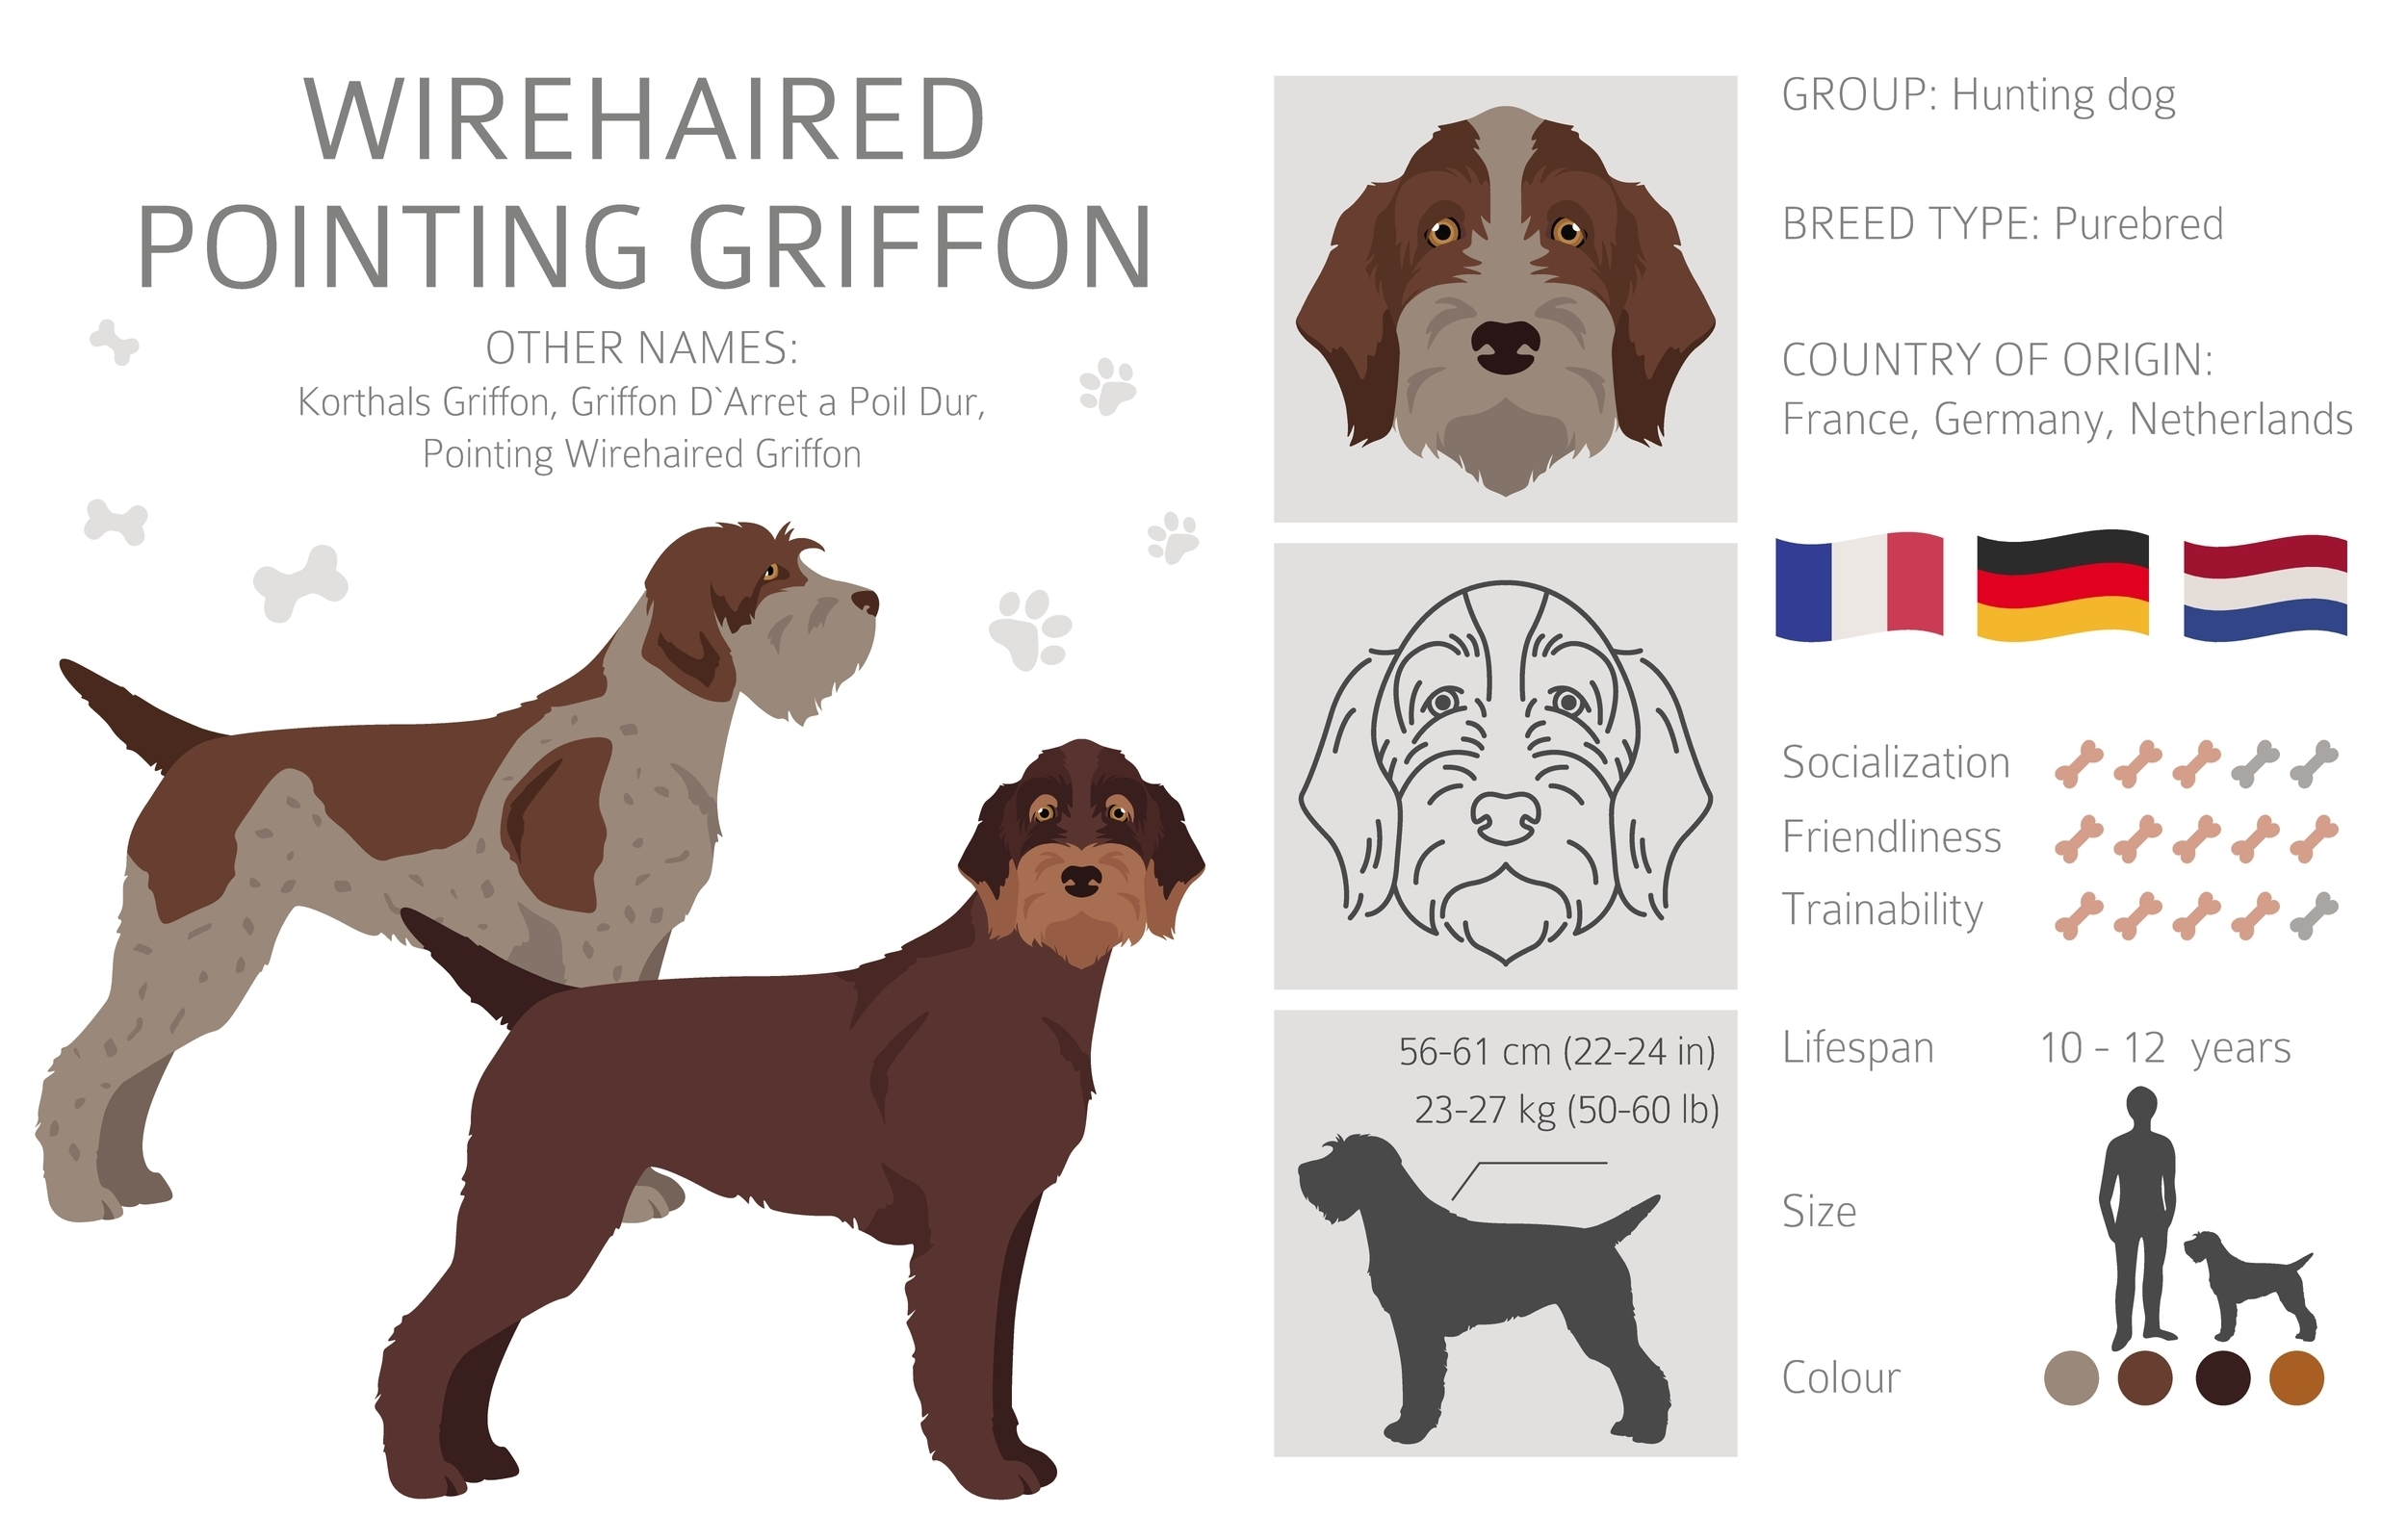 An infographic of the Wirehaired Pointing Griffon